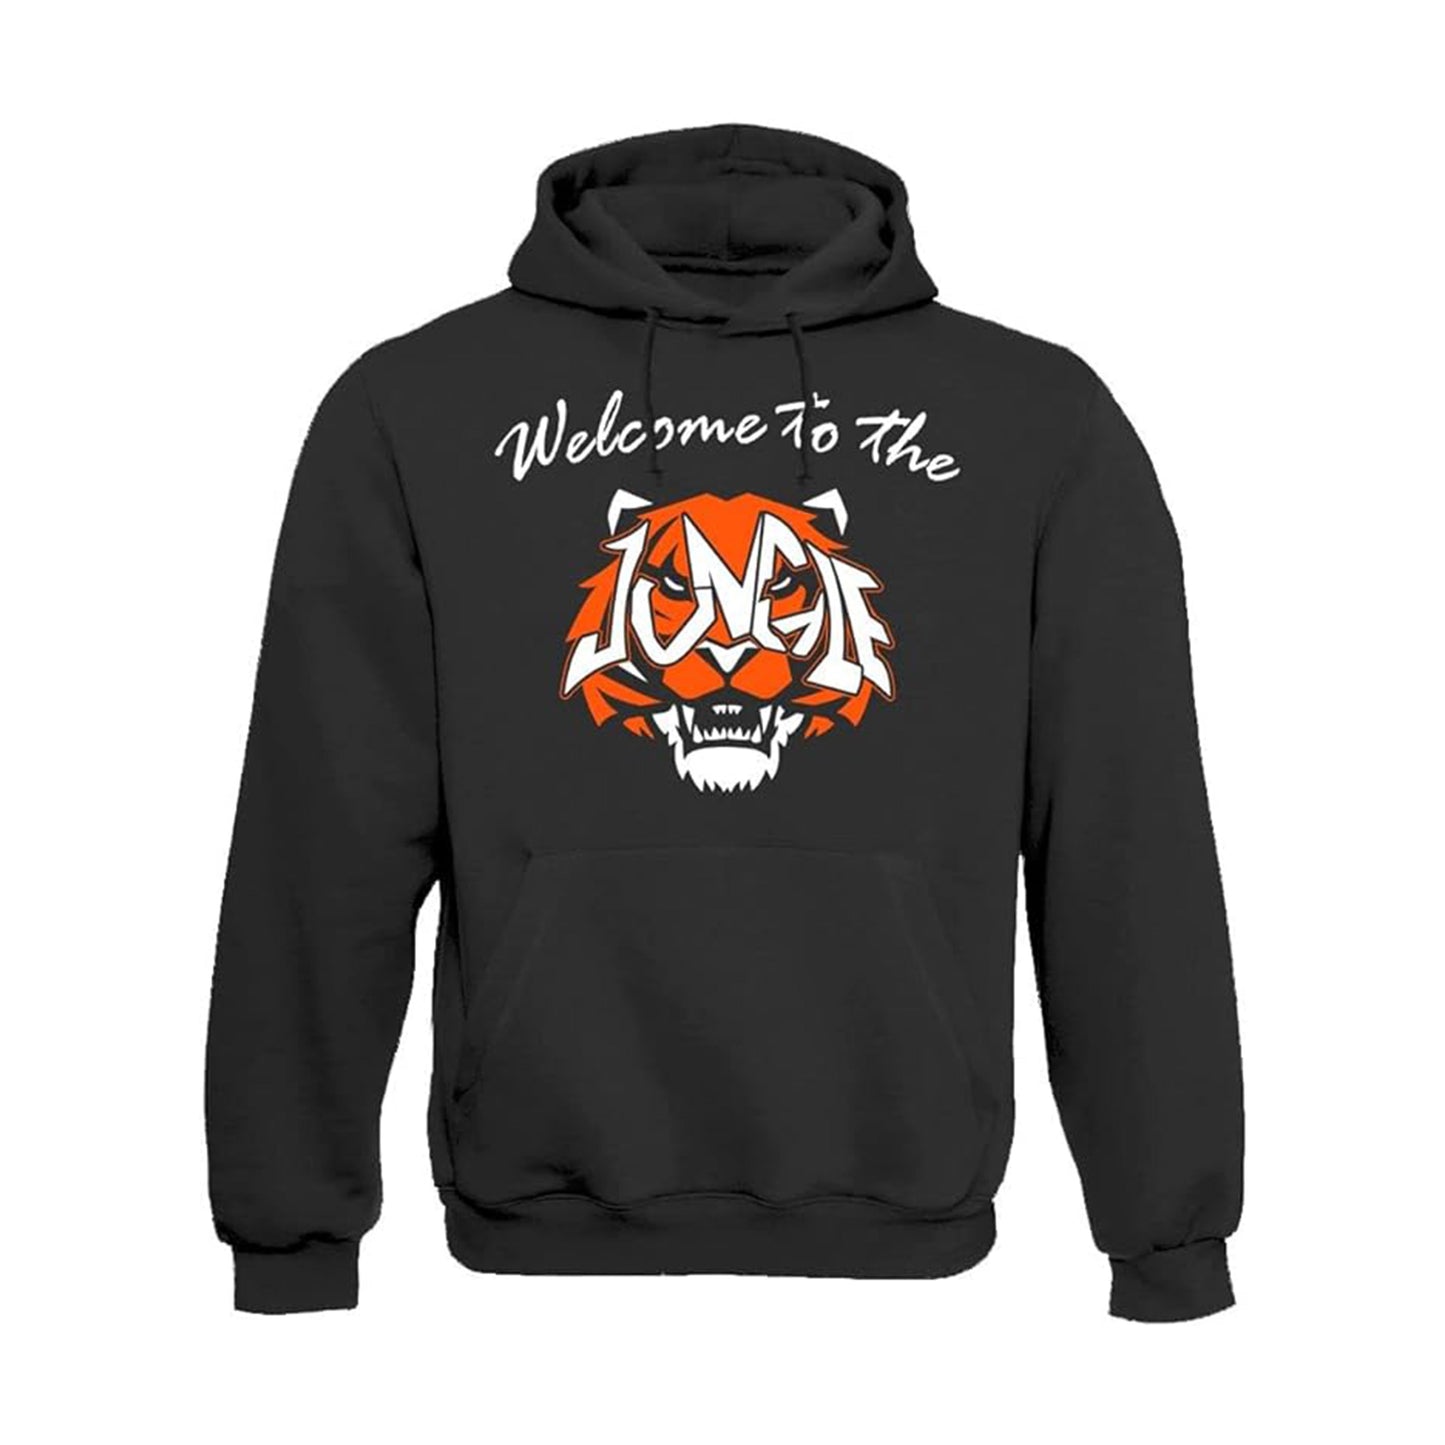 Welcome To The Jungle Cincinnati Men's Apparel for Football Fans